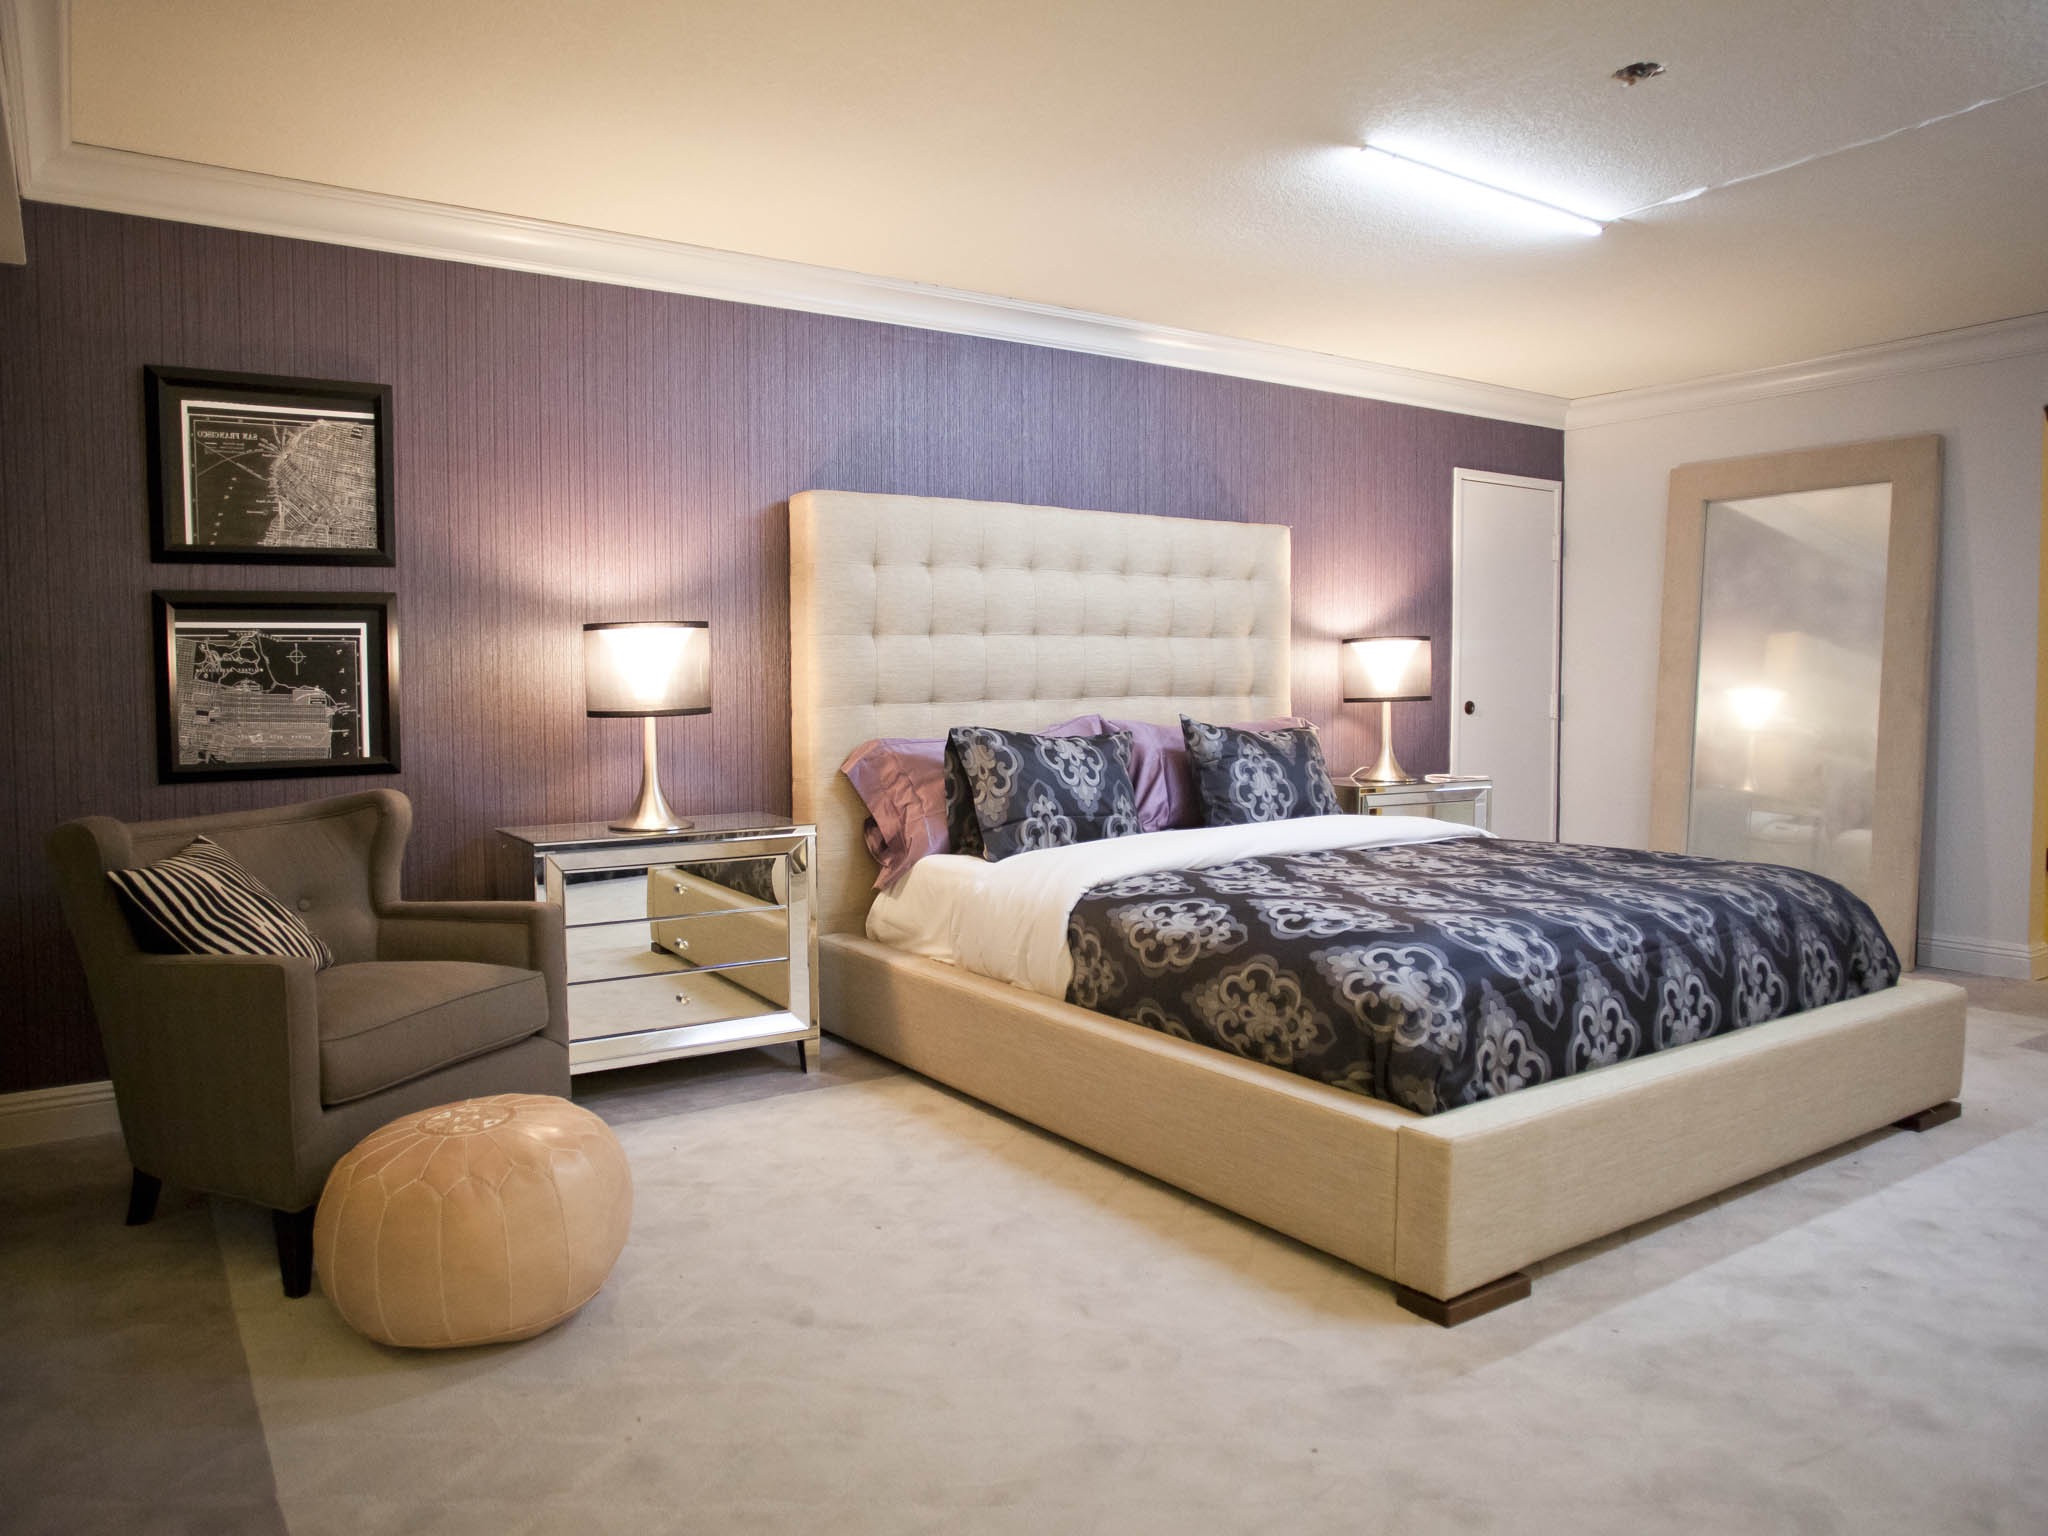 Modern Bedroom Paint Colors
 20 Lovely Bedroom Paint And Color Ideas